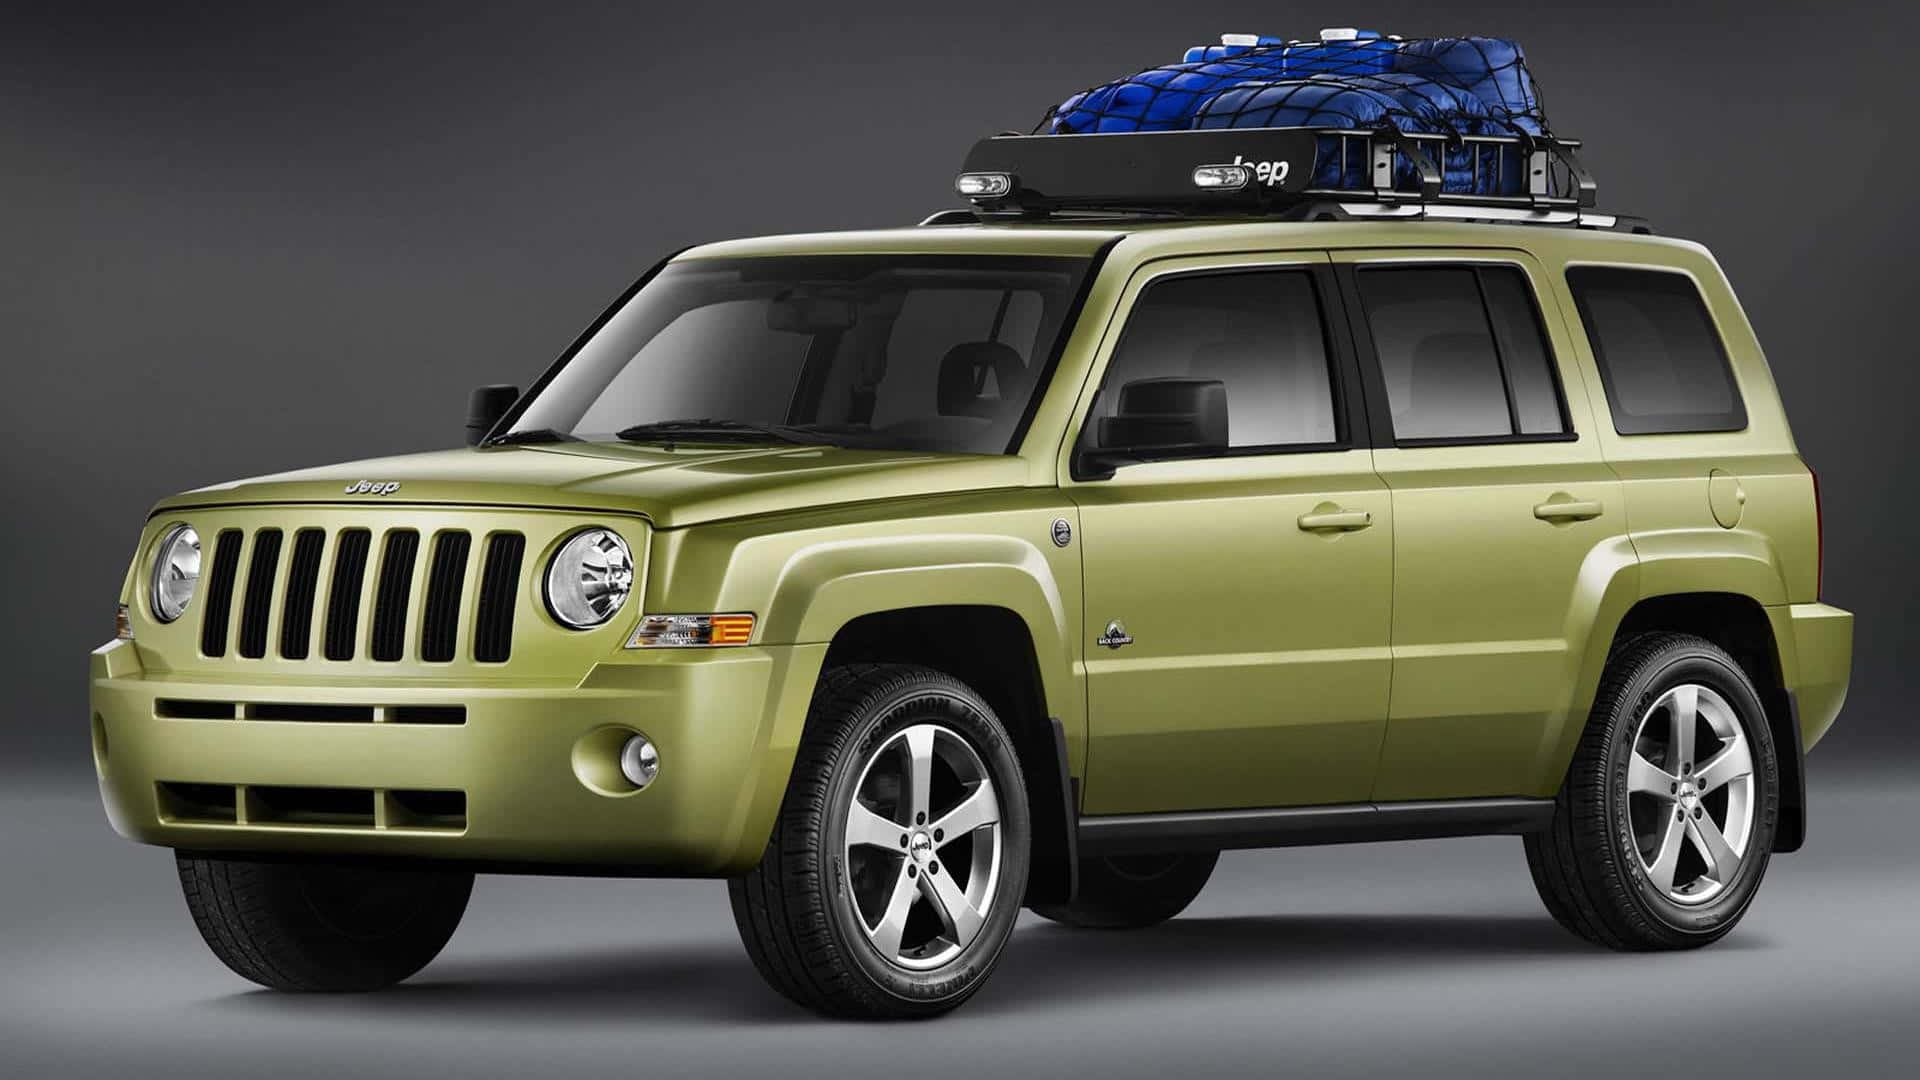 Off-road Adventure with the Jeep Patriot Wallpaper